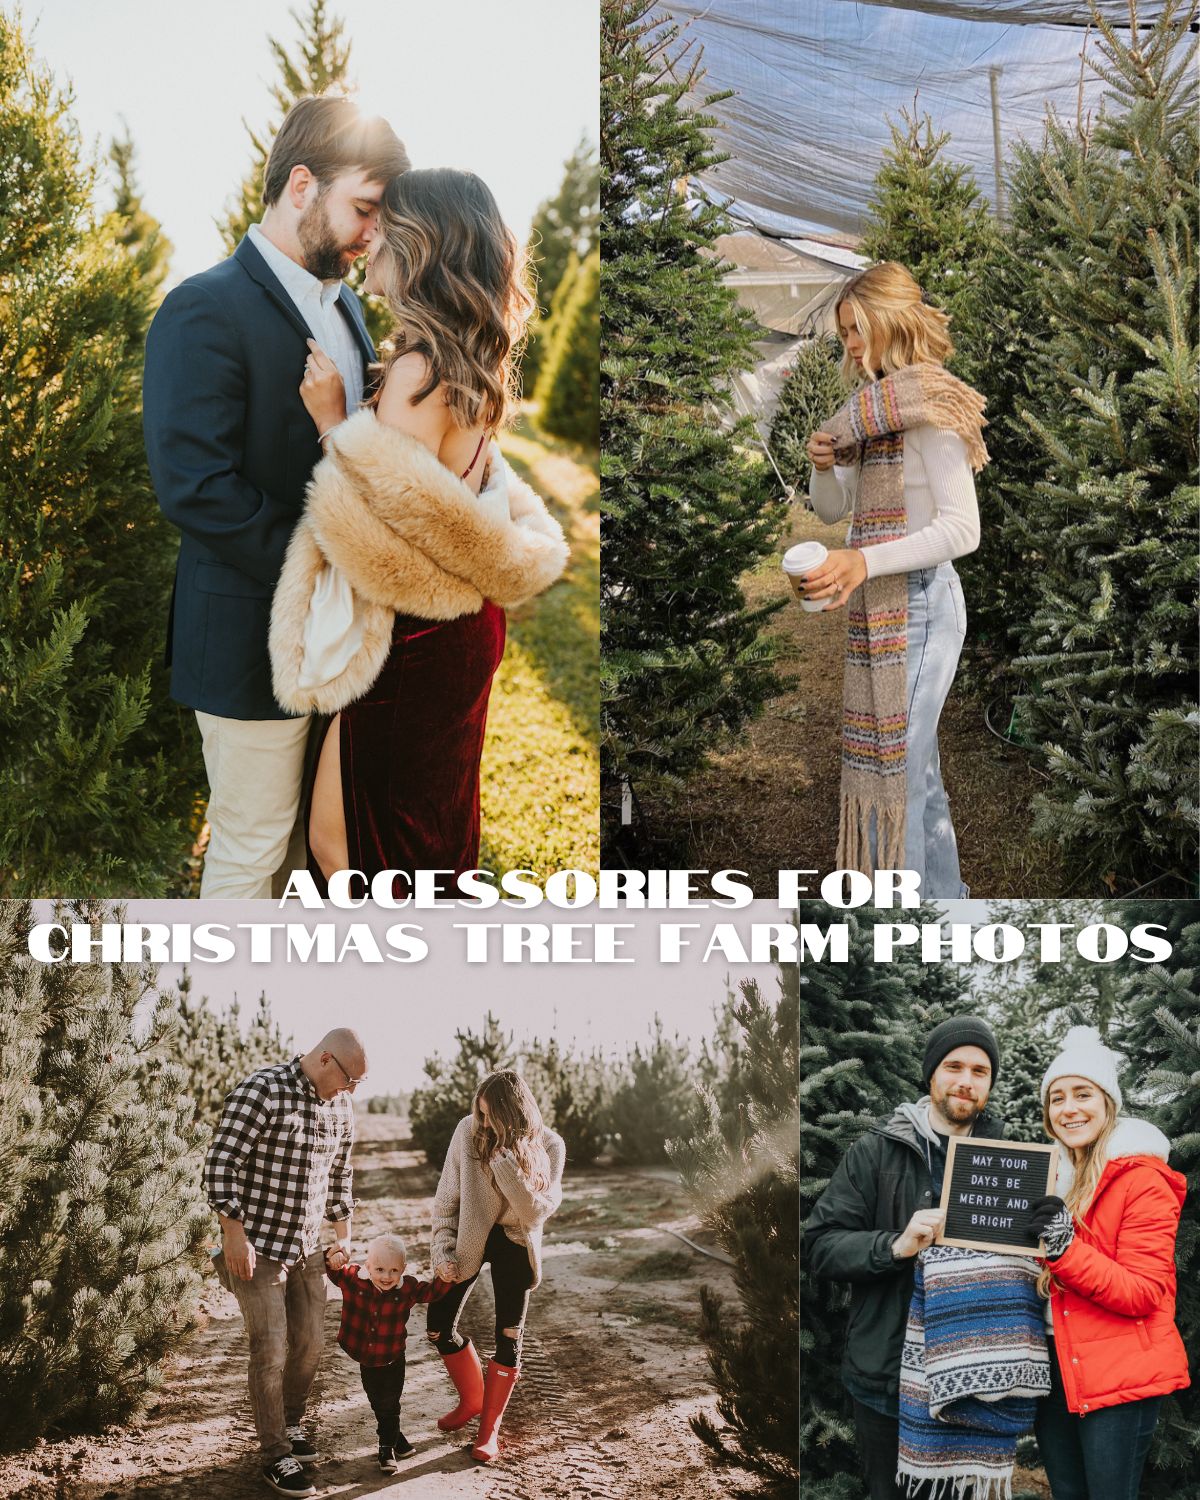 Four photos of people in a Christmas tree farm